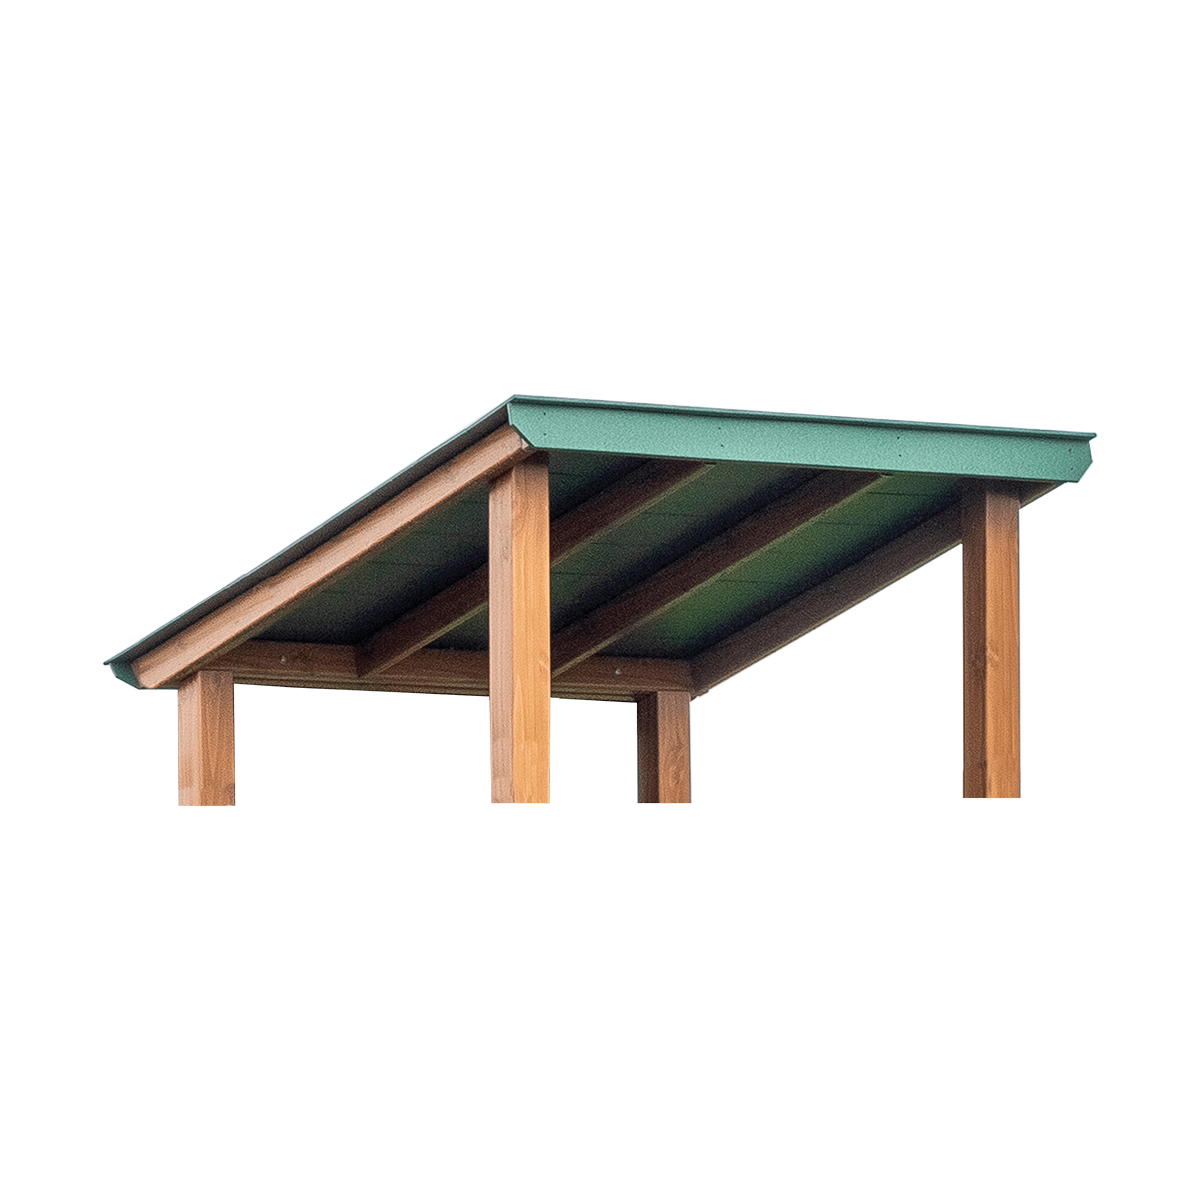 green lean to roof with wooden support beams